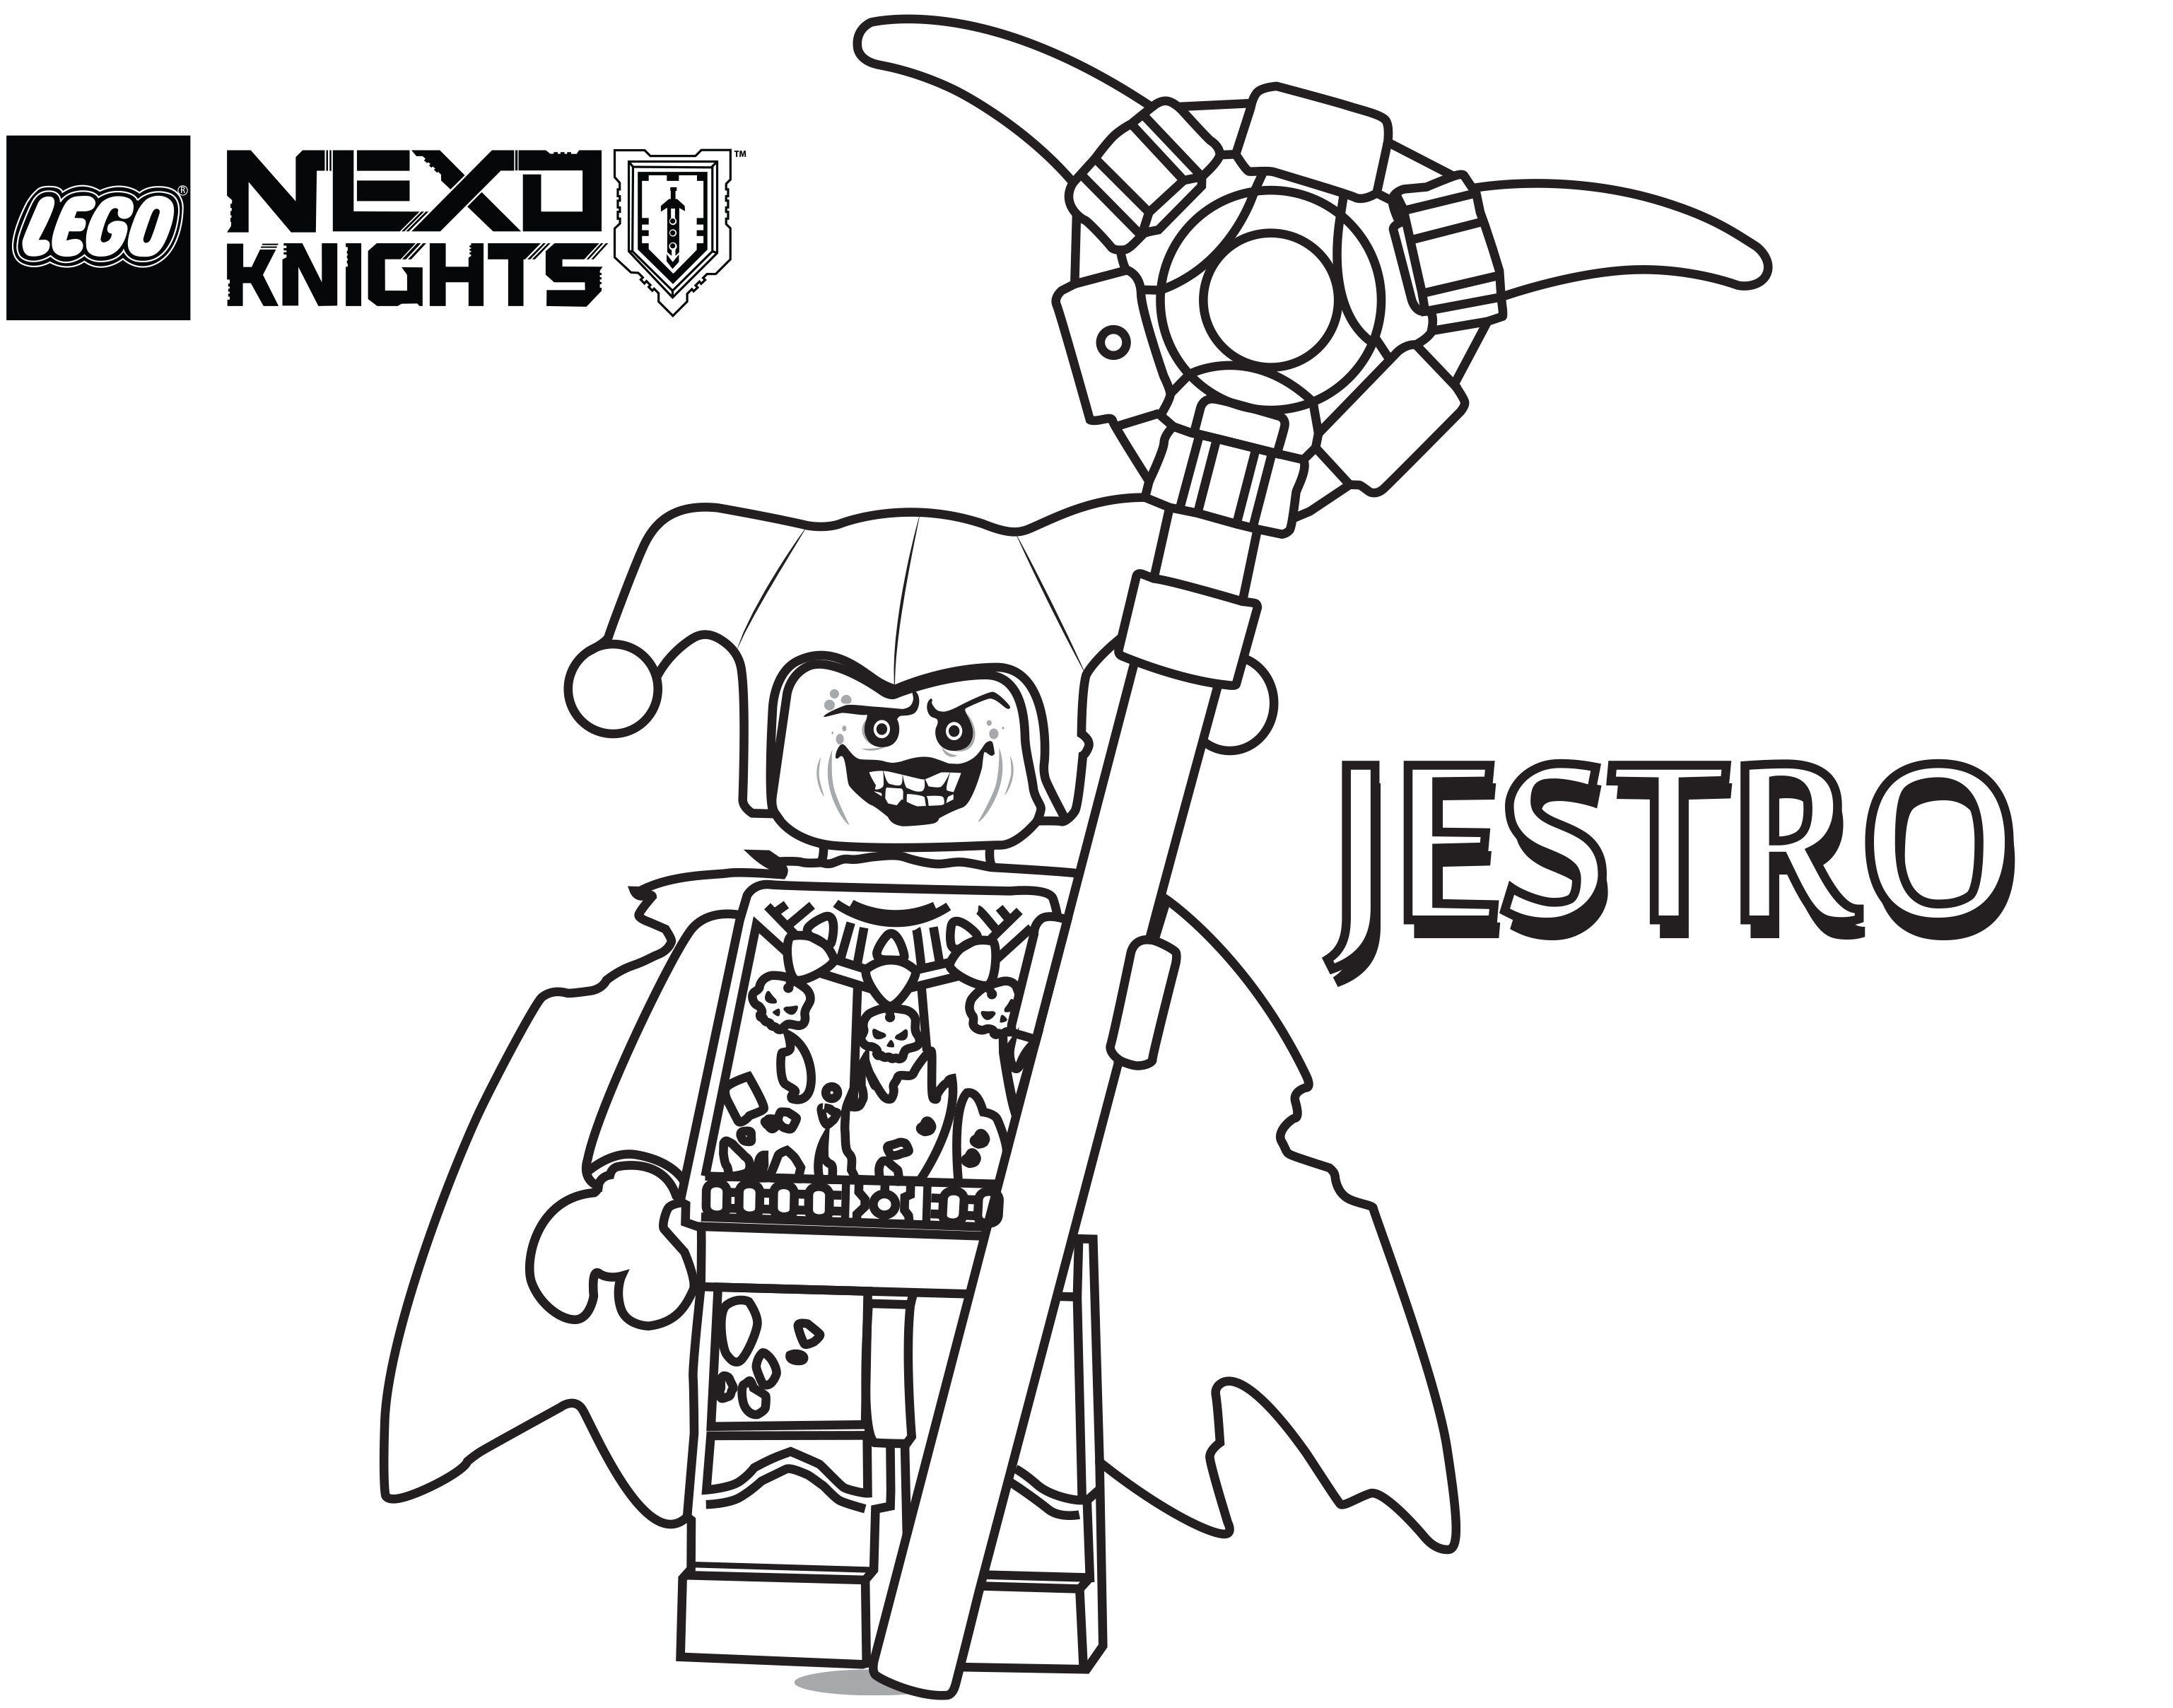 29 New LEGO Nexo Knights Coloring Pages Released! | LEGO News ...